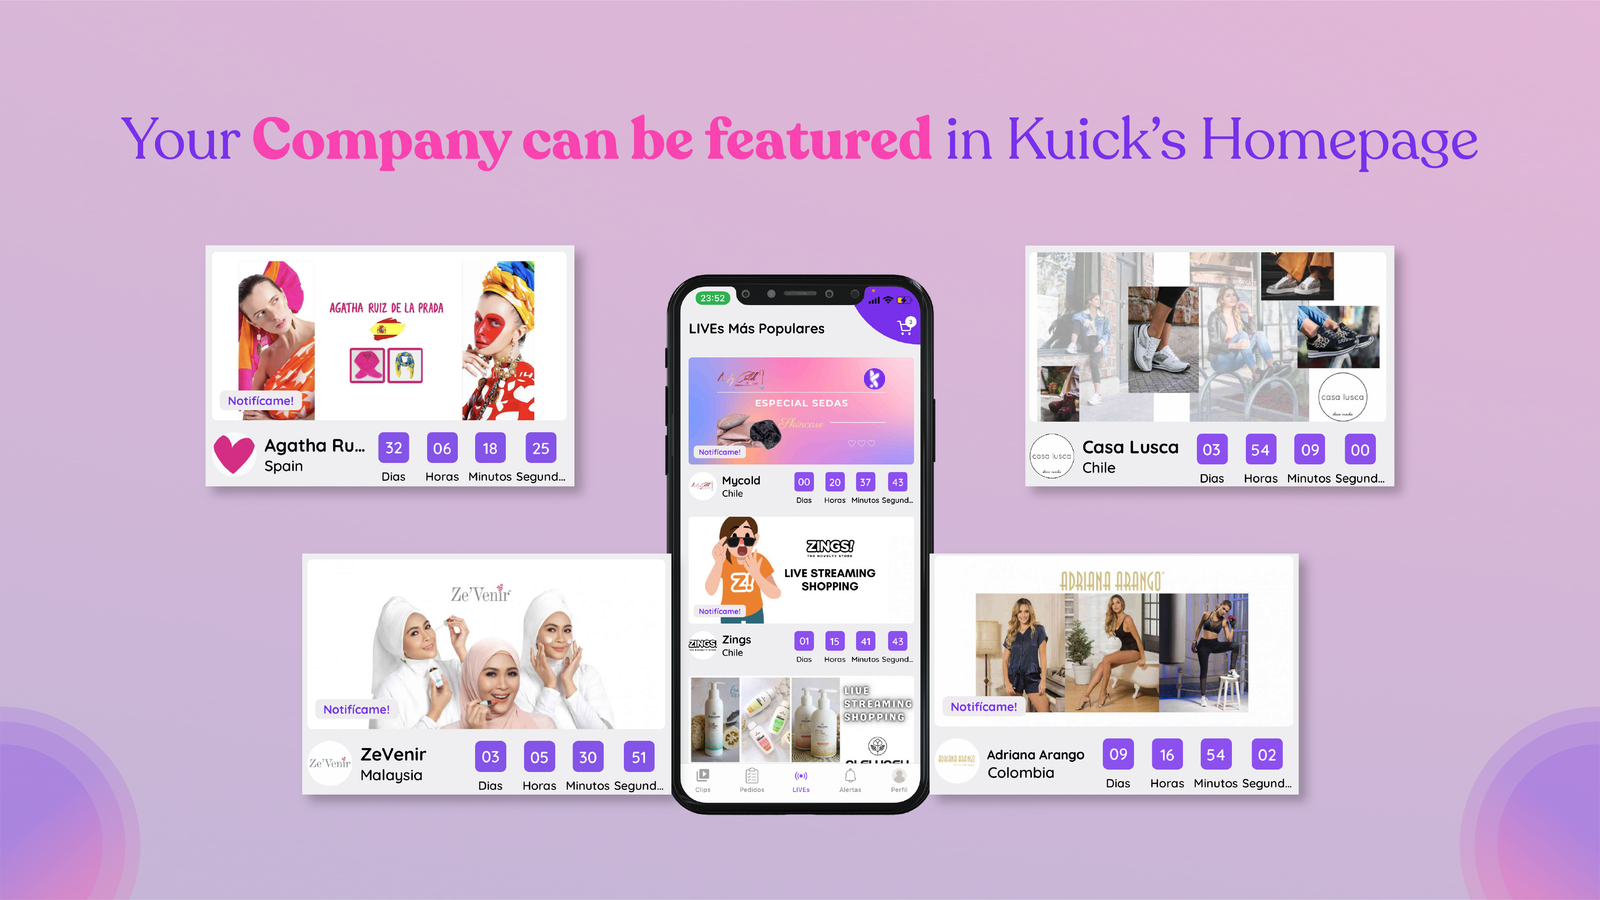 Your Company can be featured in Kuick's Homepage